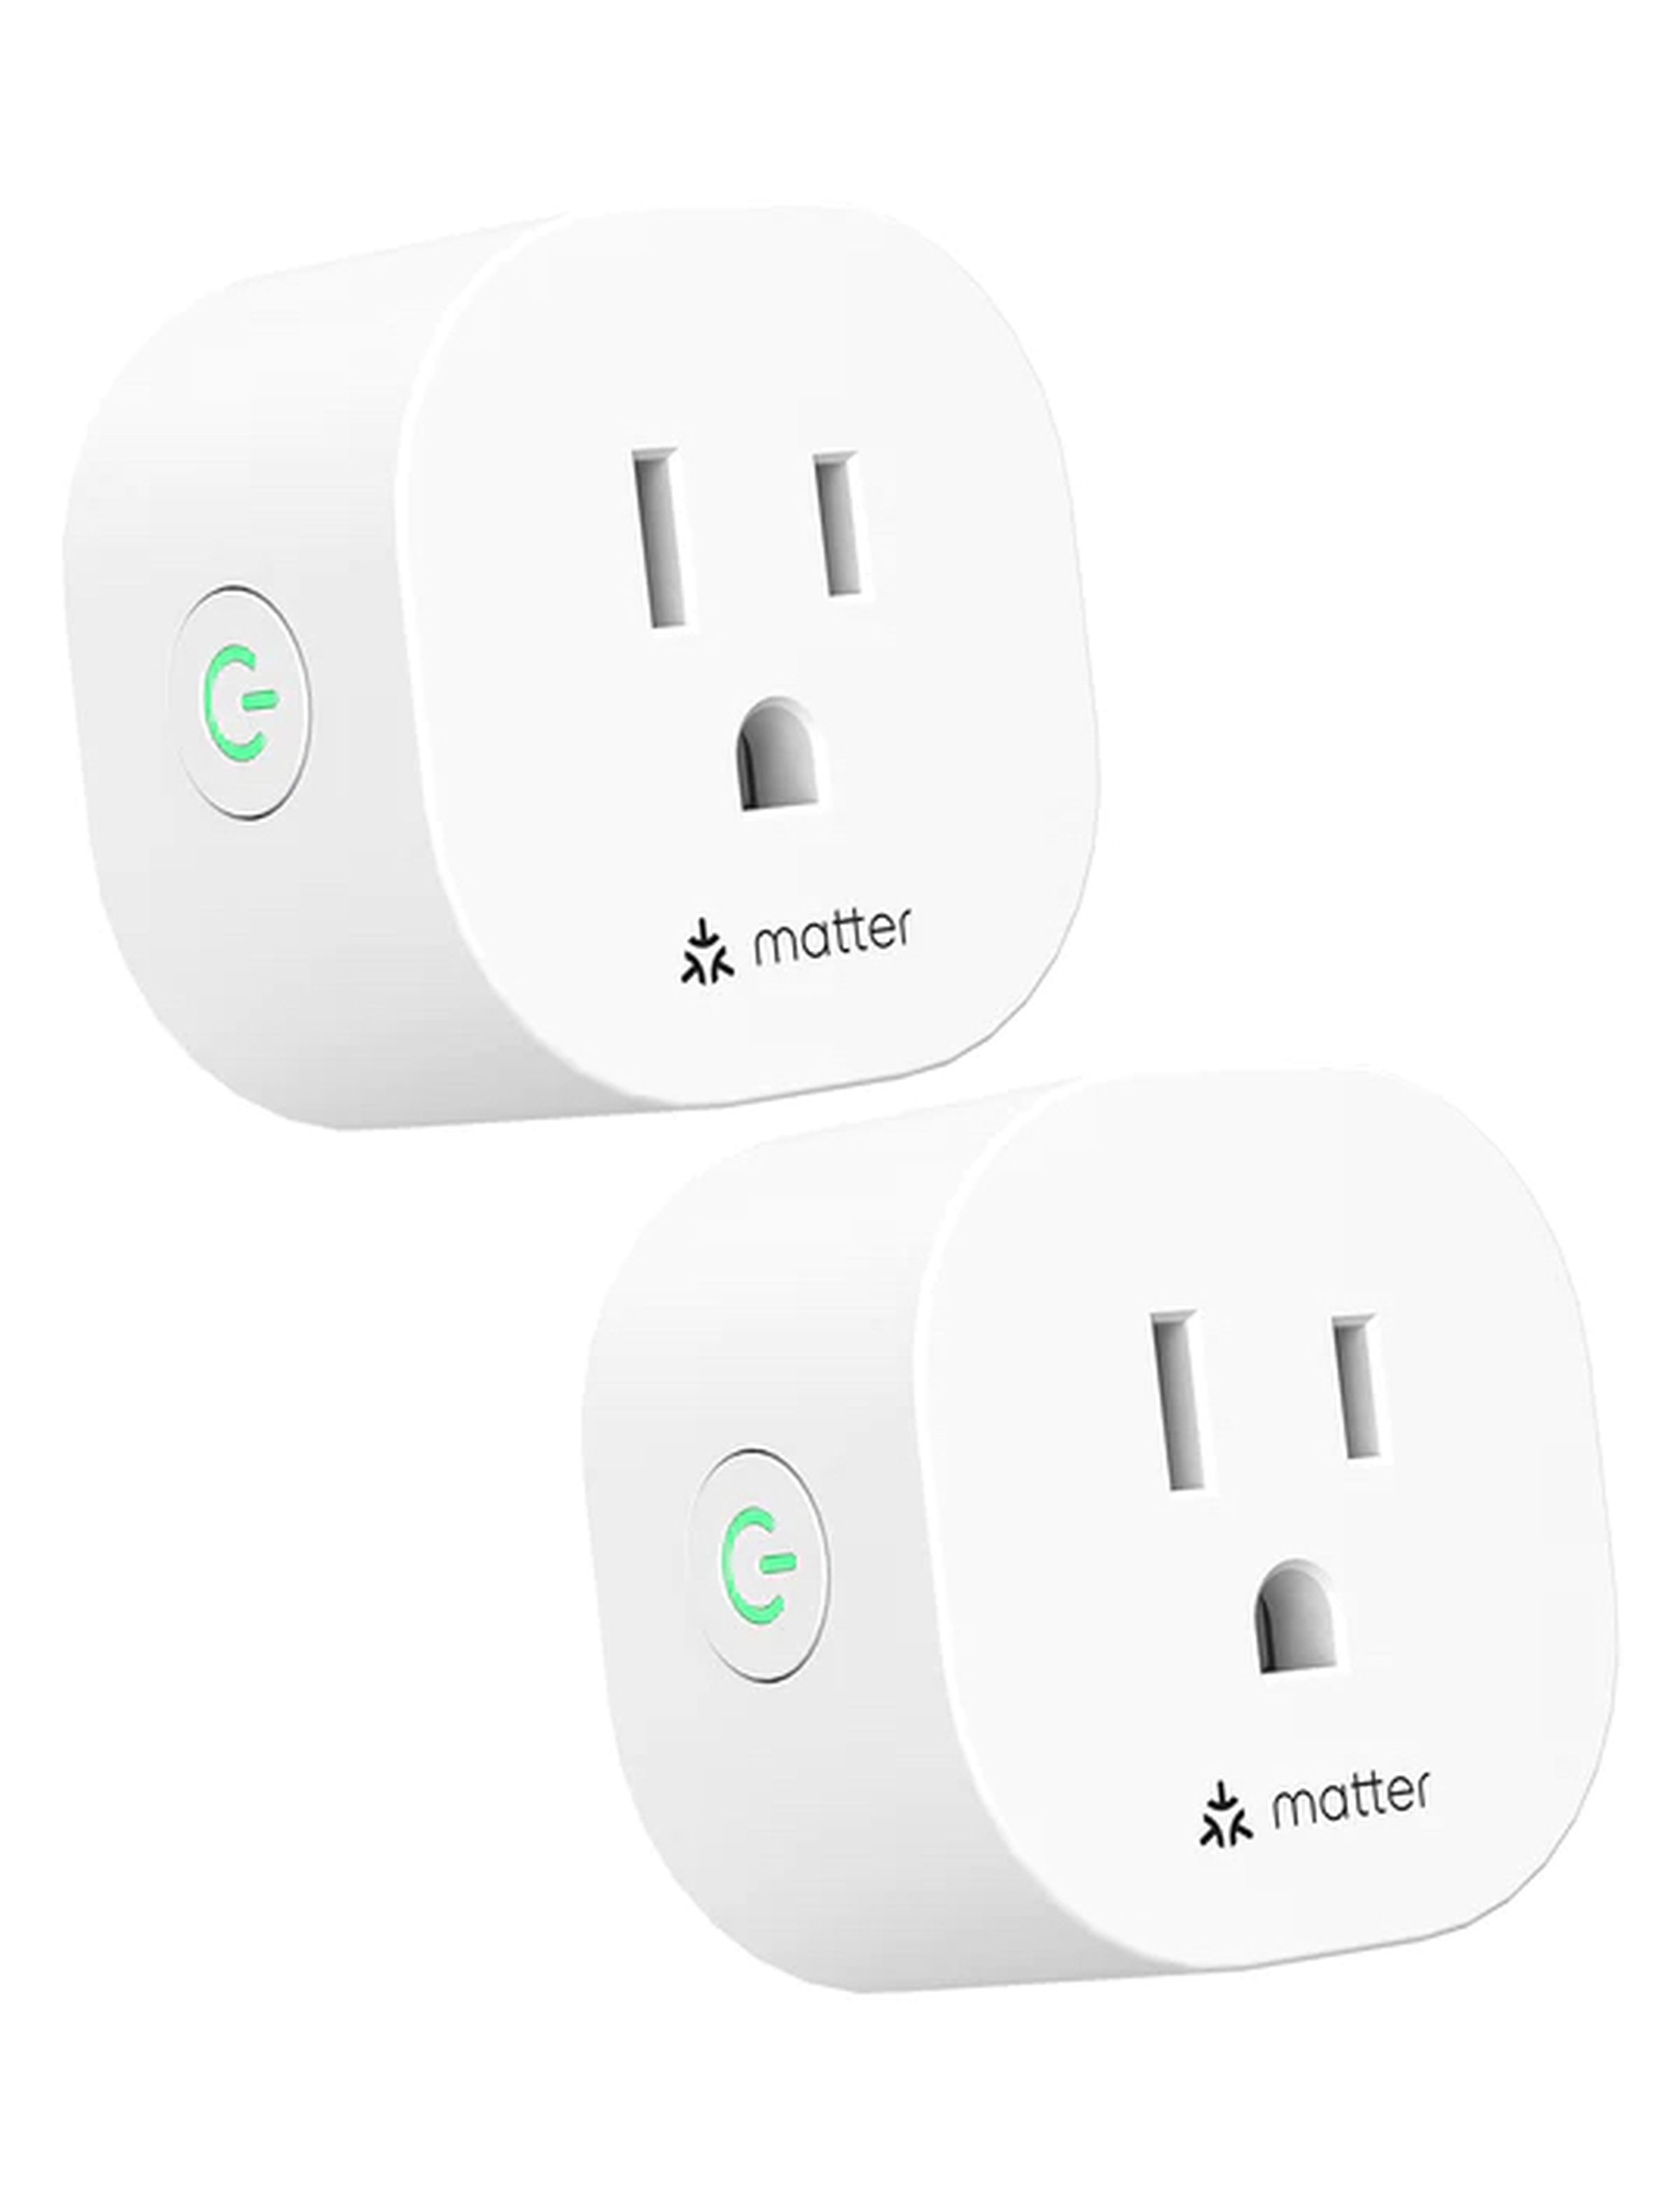 The Meross Matter Mini smart plug is one of the first devices we’ve seen with the Matter logo on it.